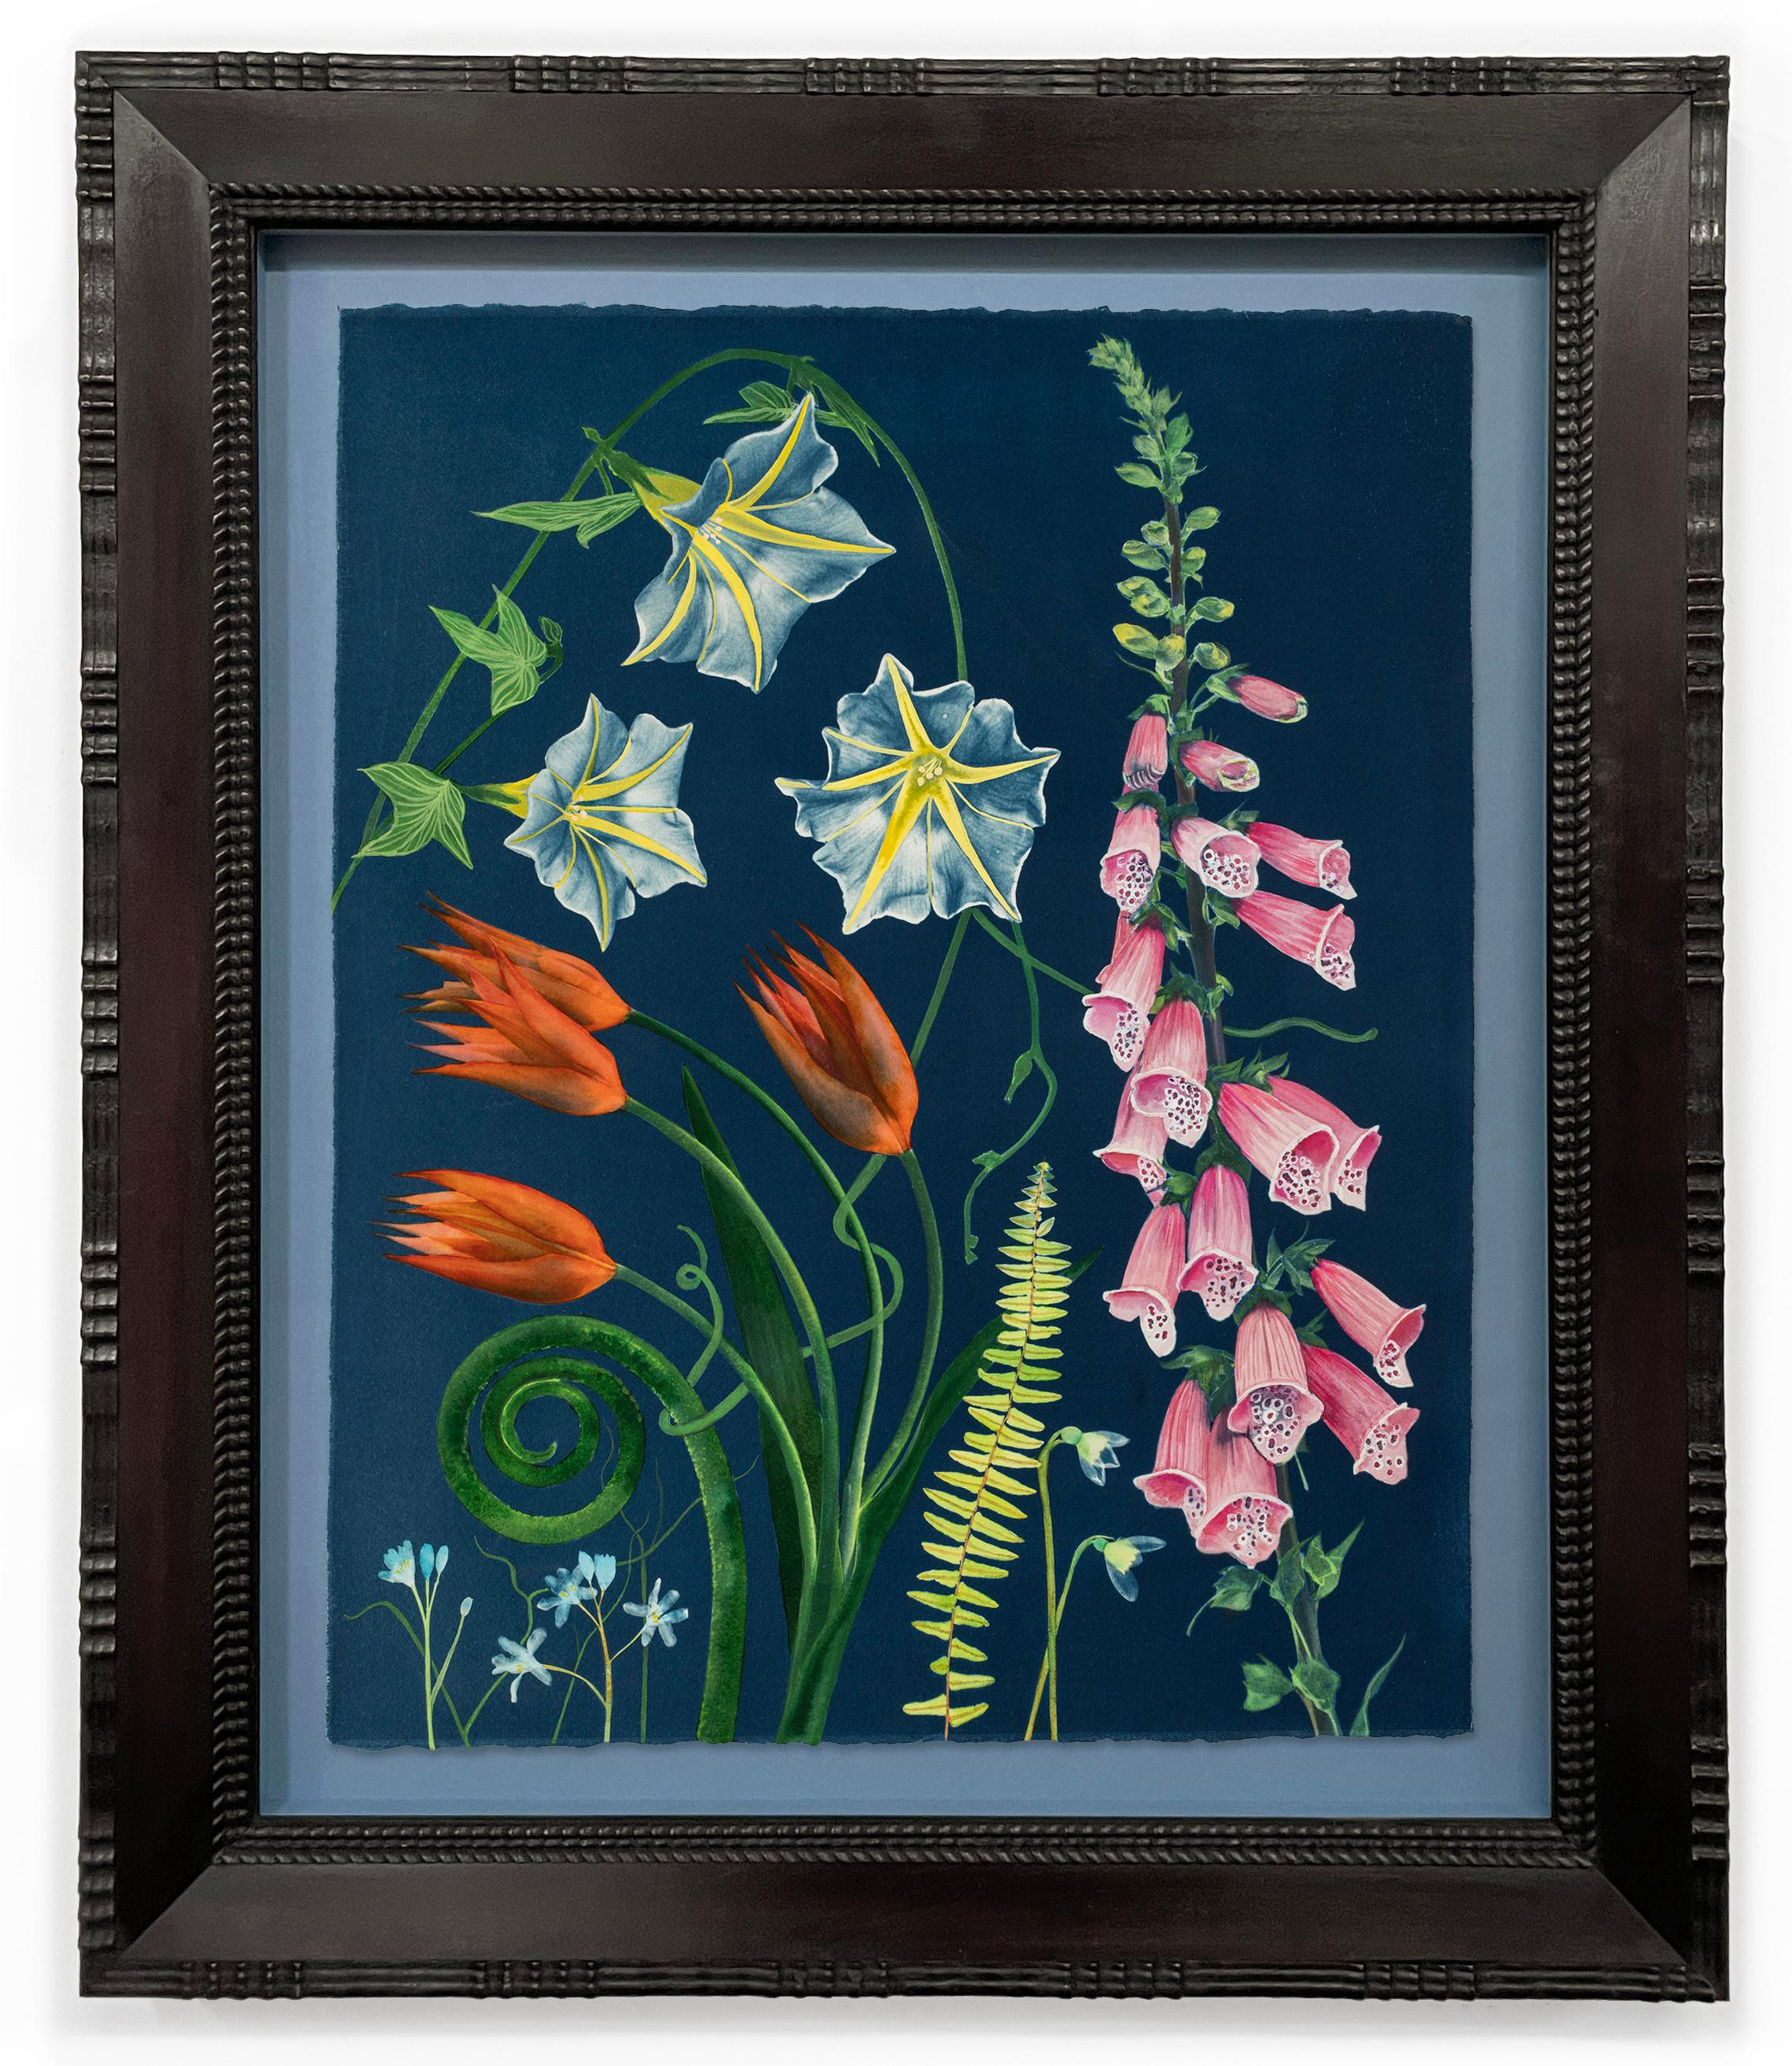 Picturesque Botany (Still Life Painting of Colorful Flowers on Indigo Blue) - Mixed Media Art by Julia Whitney Barnes